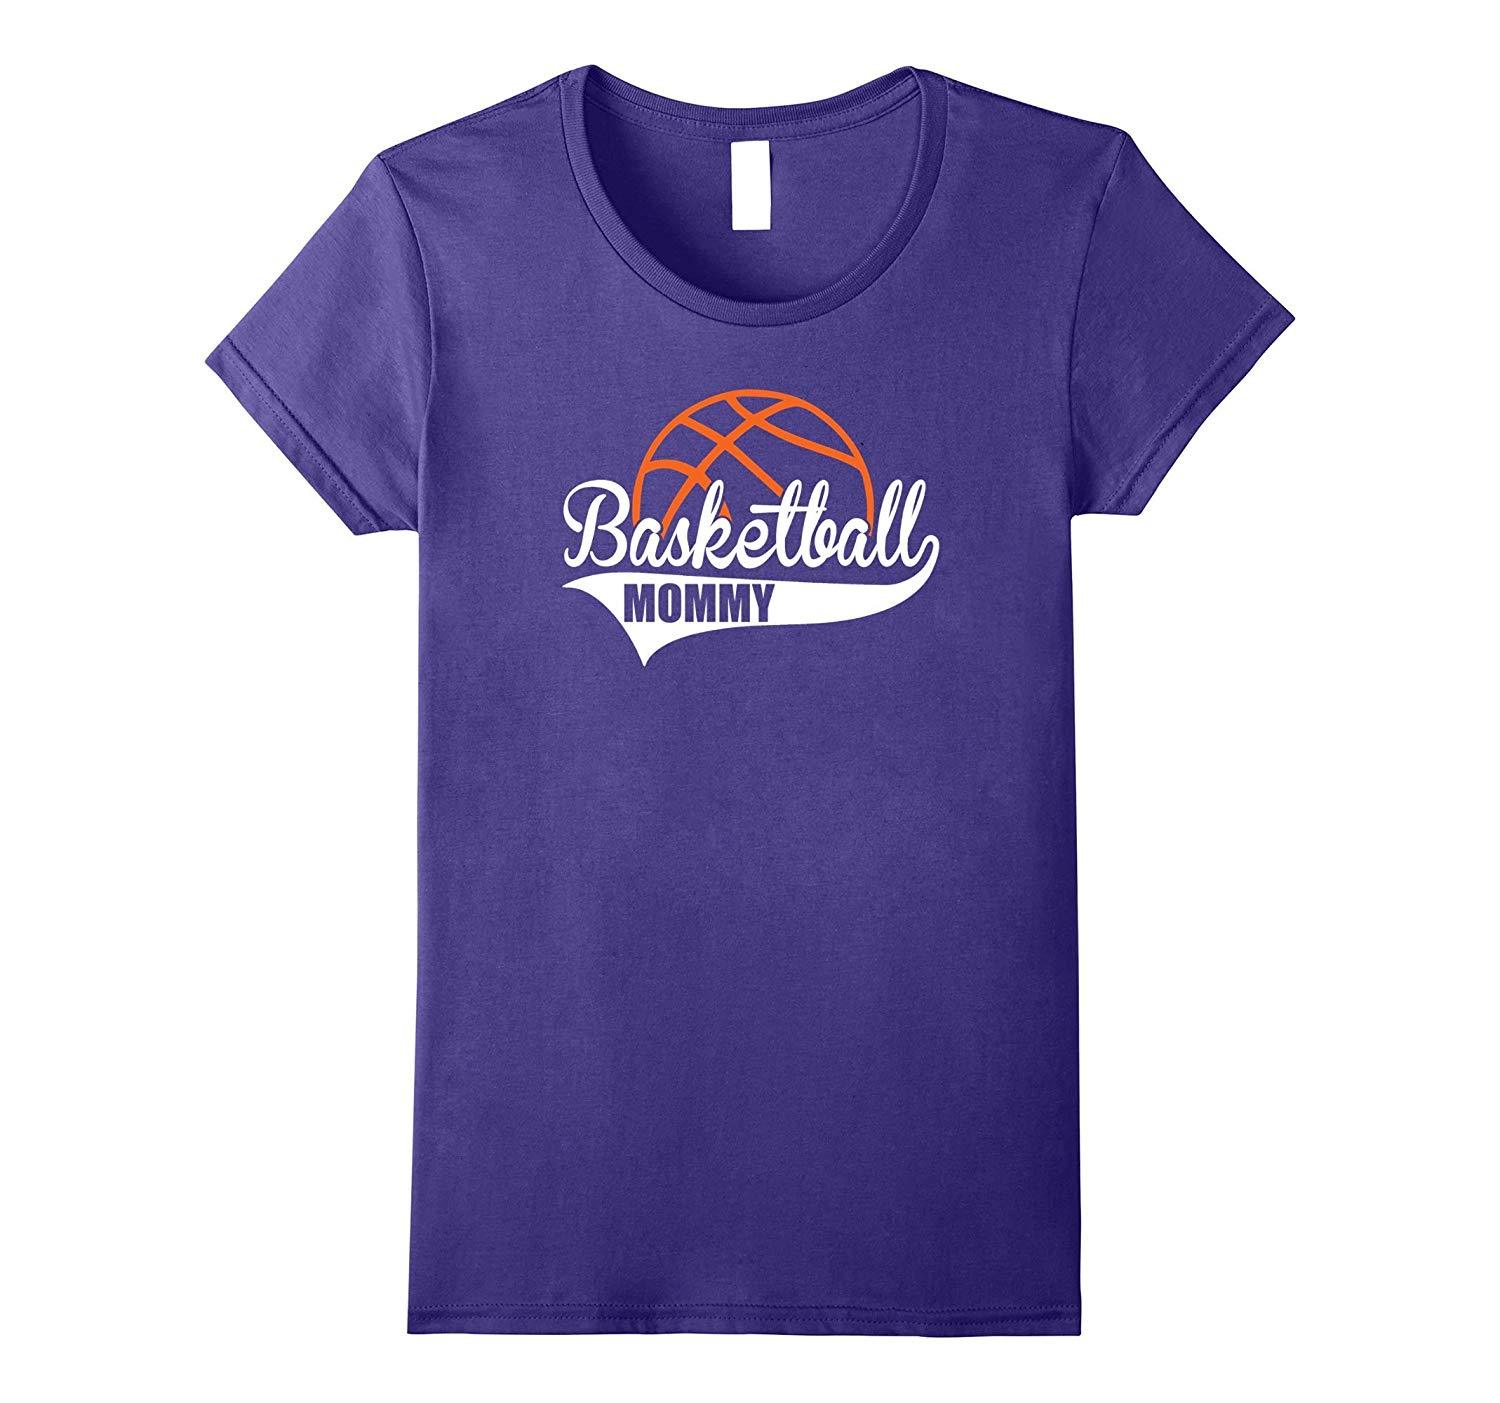 New Tee - Basketball MOMMY T-Tee Matching Family Basketball Wowen - Tops